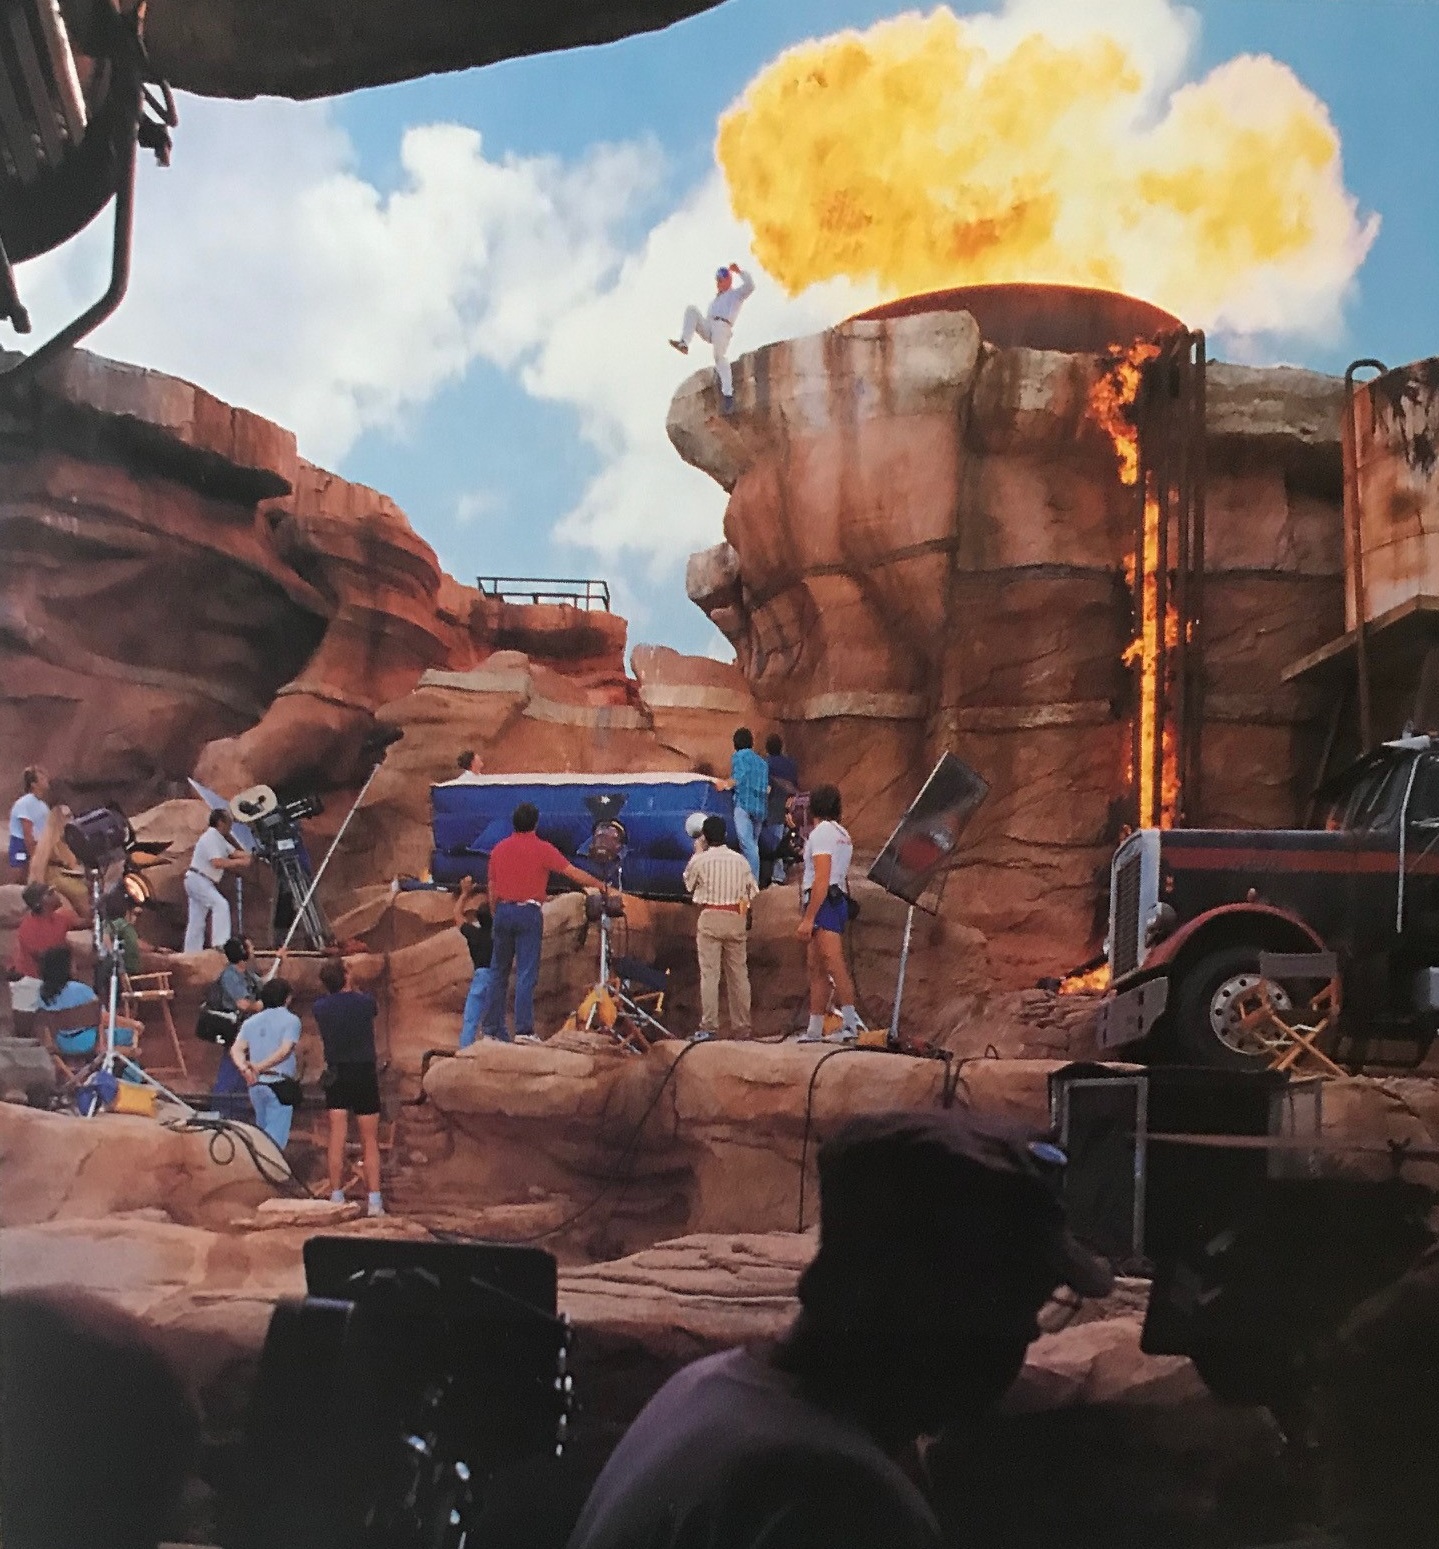 Opening Day Attractions at Disney-MGM Studios: Gone, But Not Forgotten